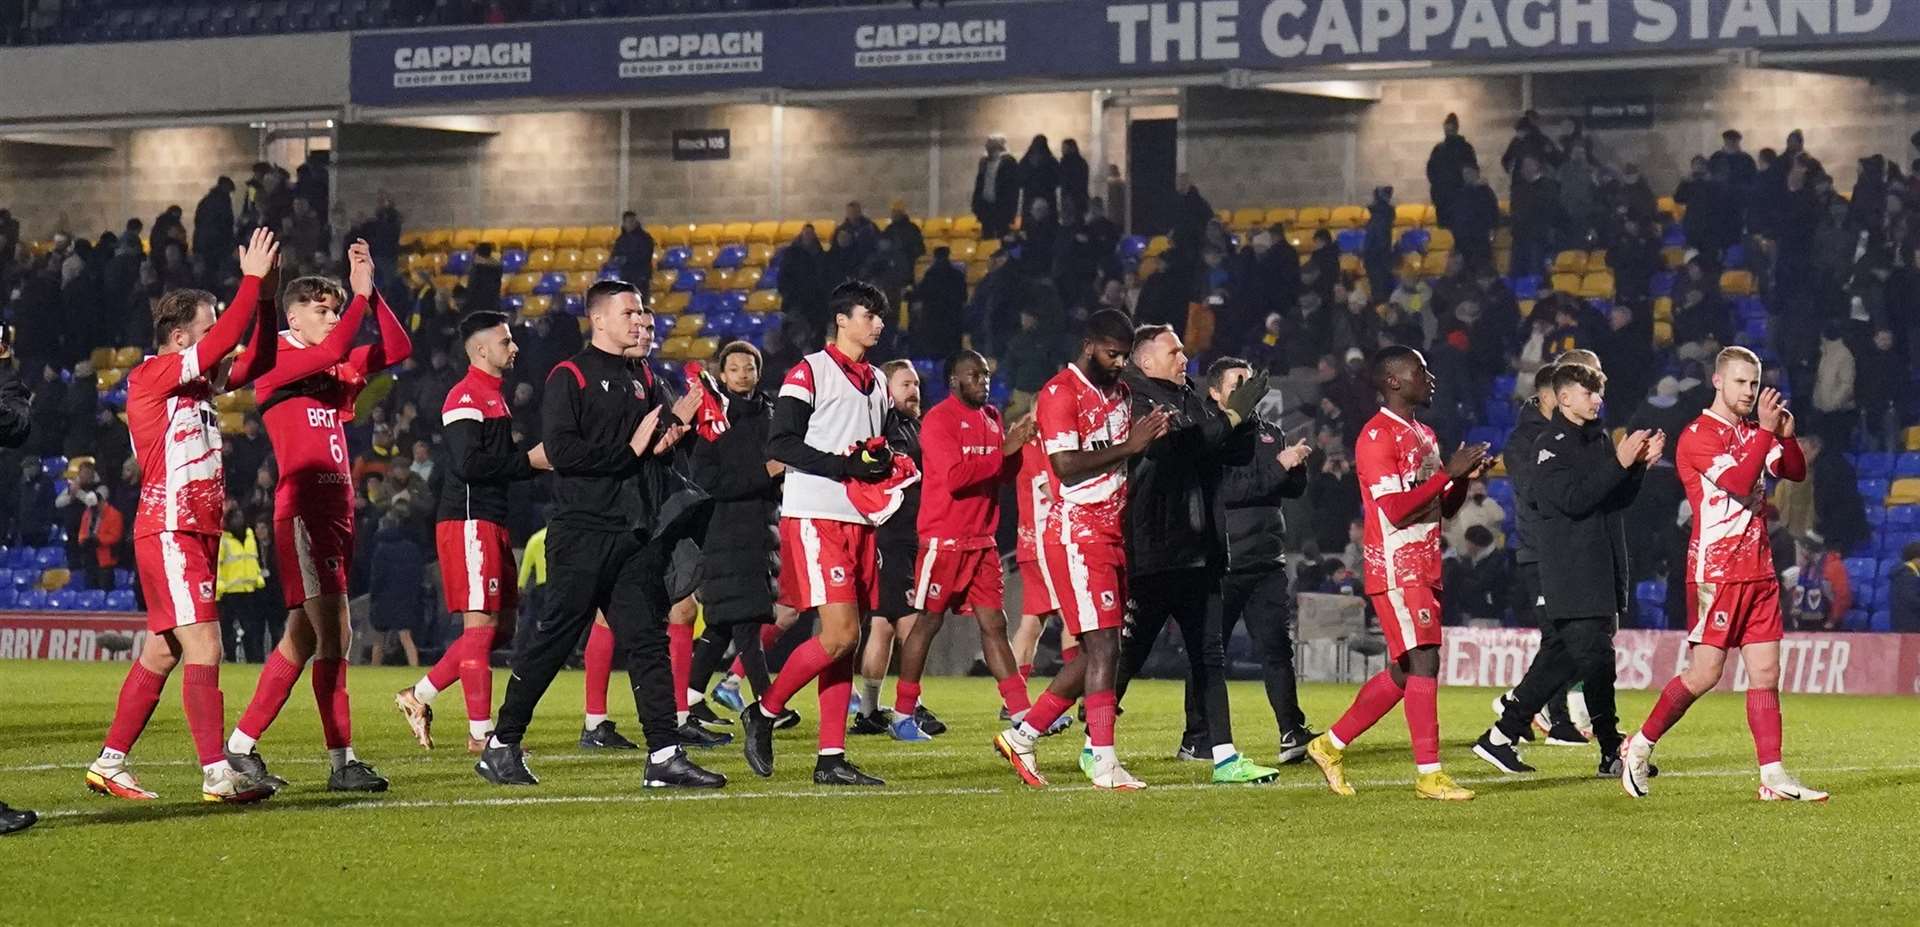 Ramsgate players applaud the 1,400 travelling fans after their FA Cup Second Round defeat at AFC Wimbledon on Monday Picture: PA Images